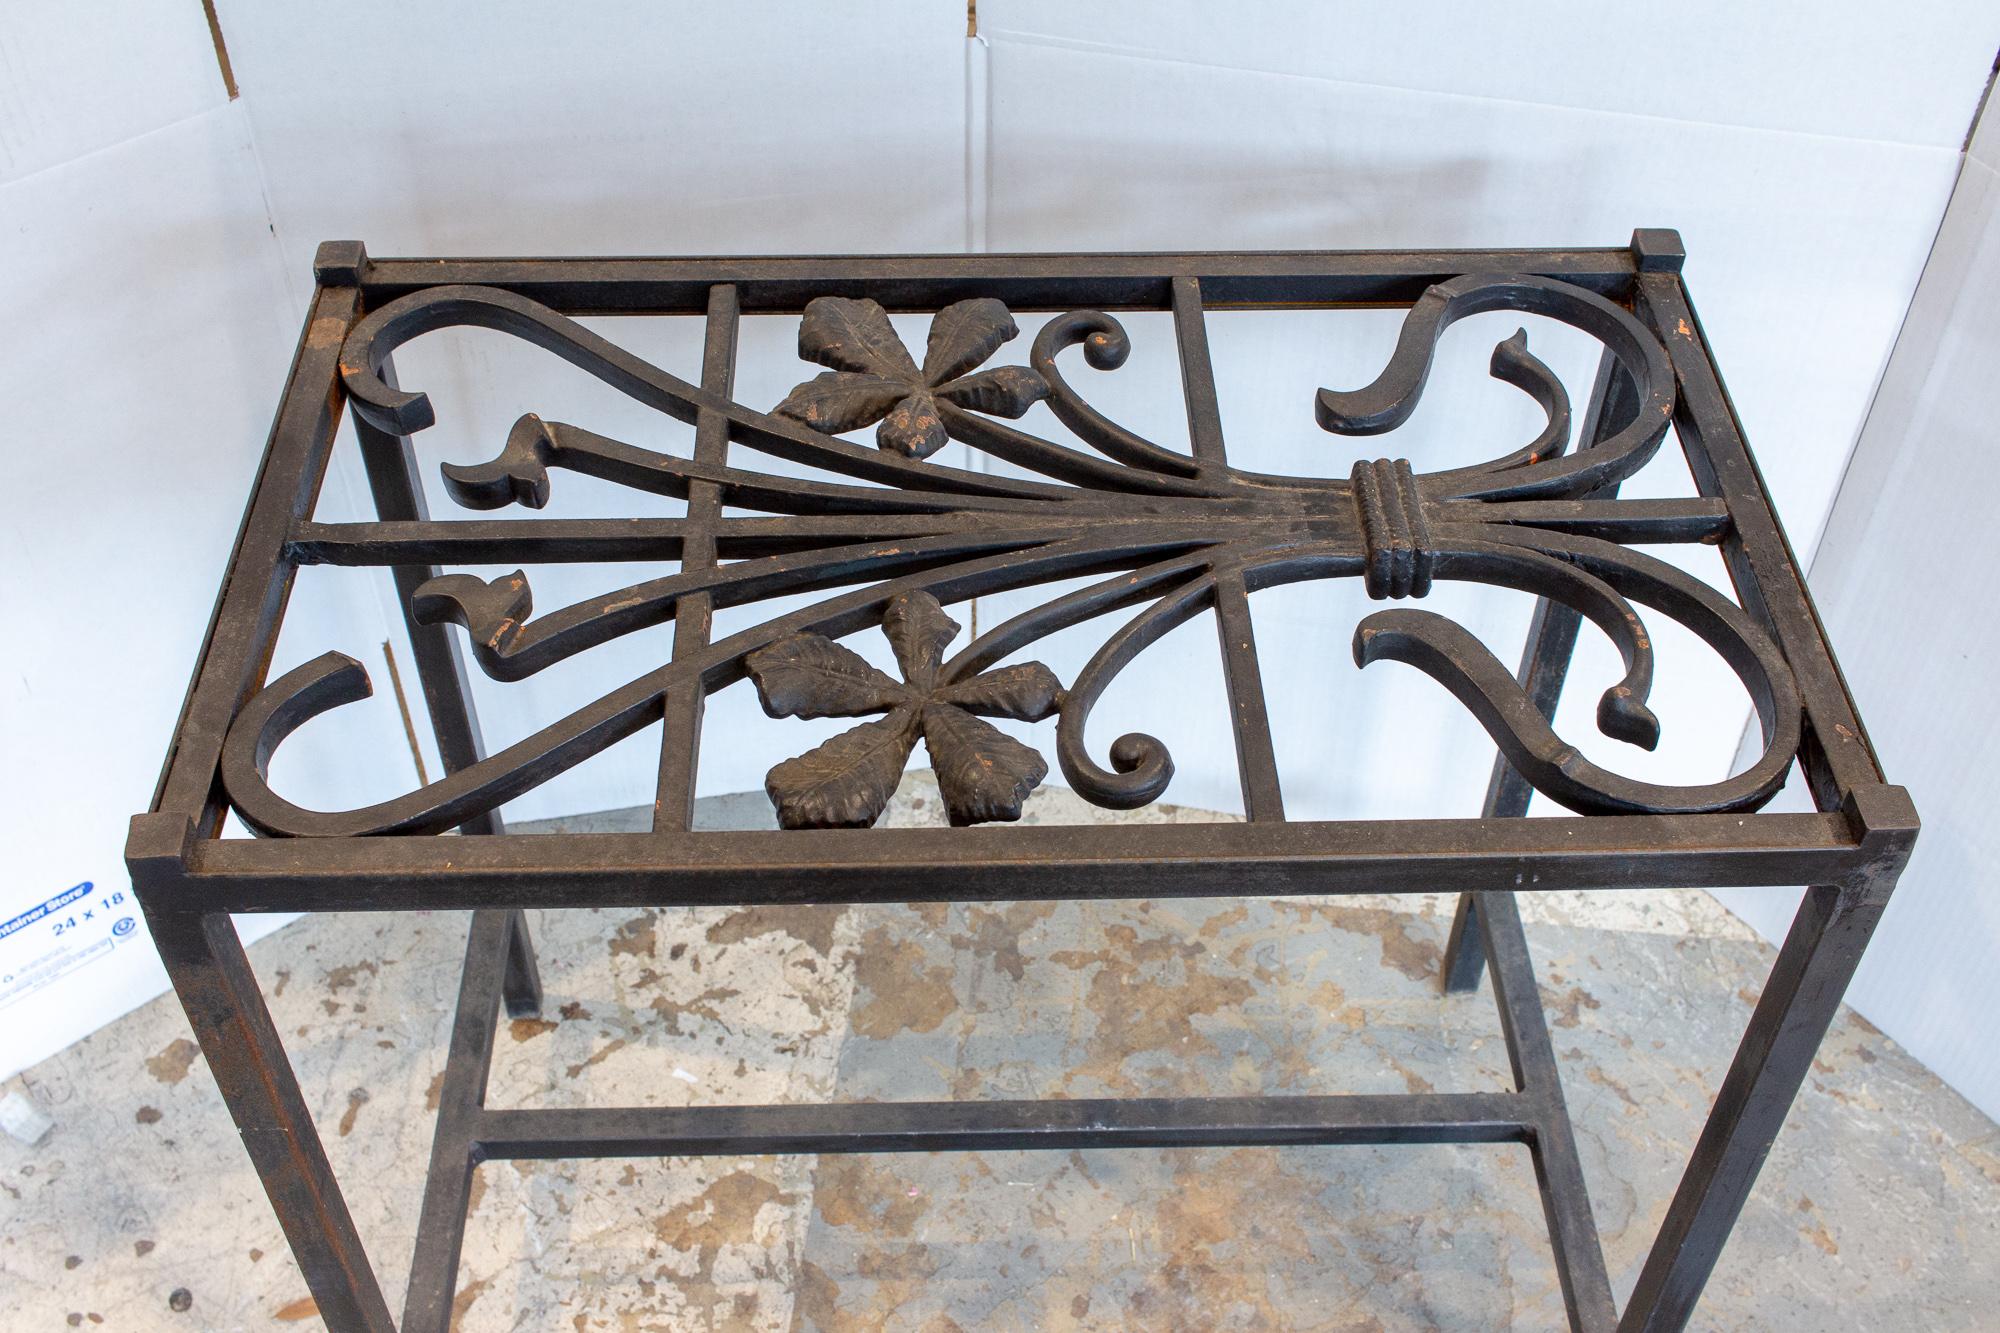 This iron console table has been crafted with a wonderful, iron art nouveau top, with a simple wrought iron table frame. The piece could be used indoors or out, as a small accent table. The floral details of the top make a feminine statement piece